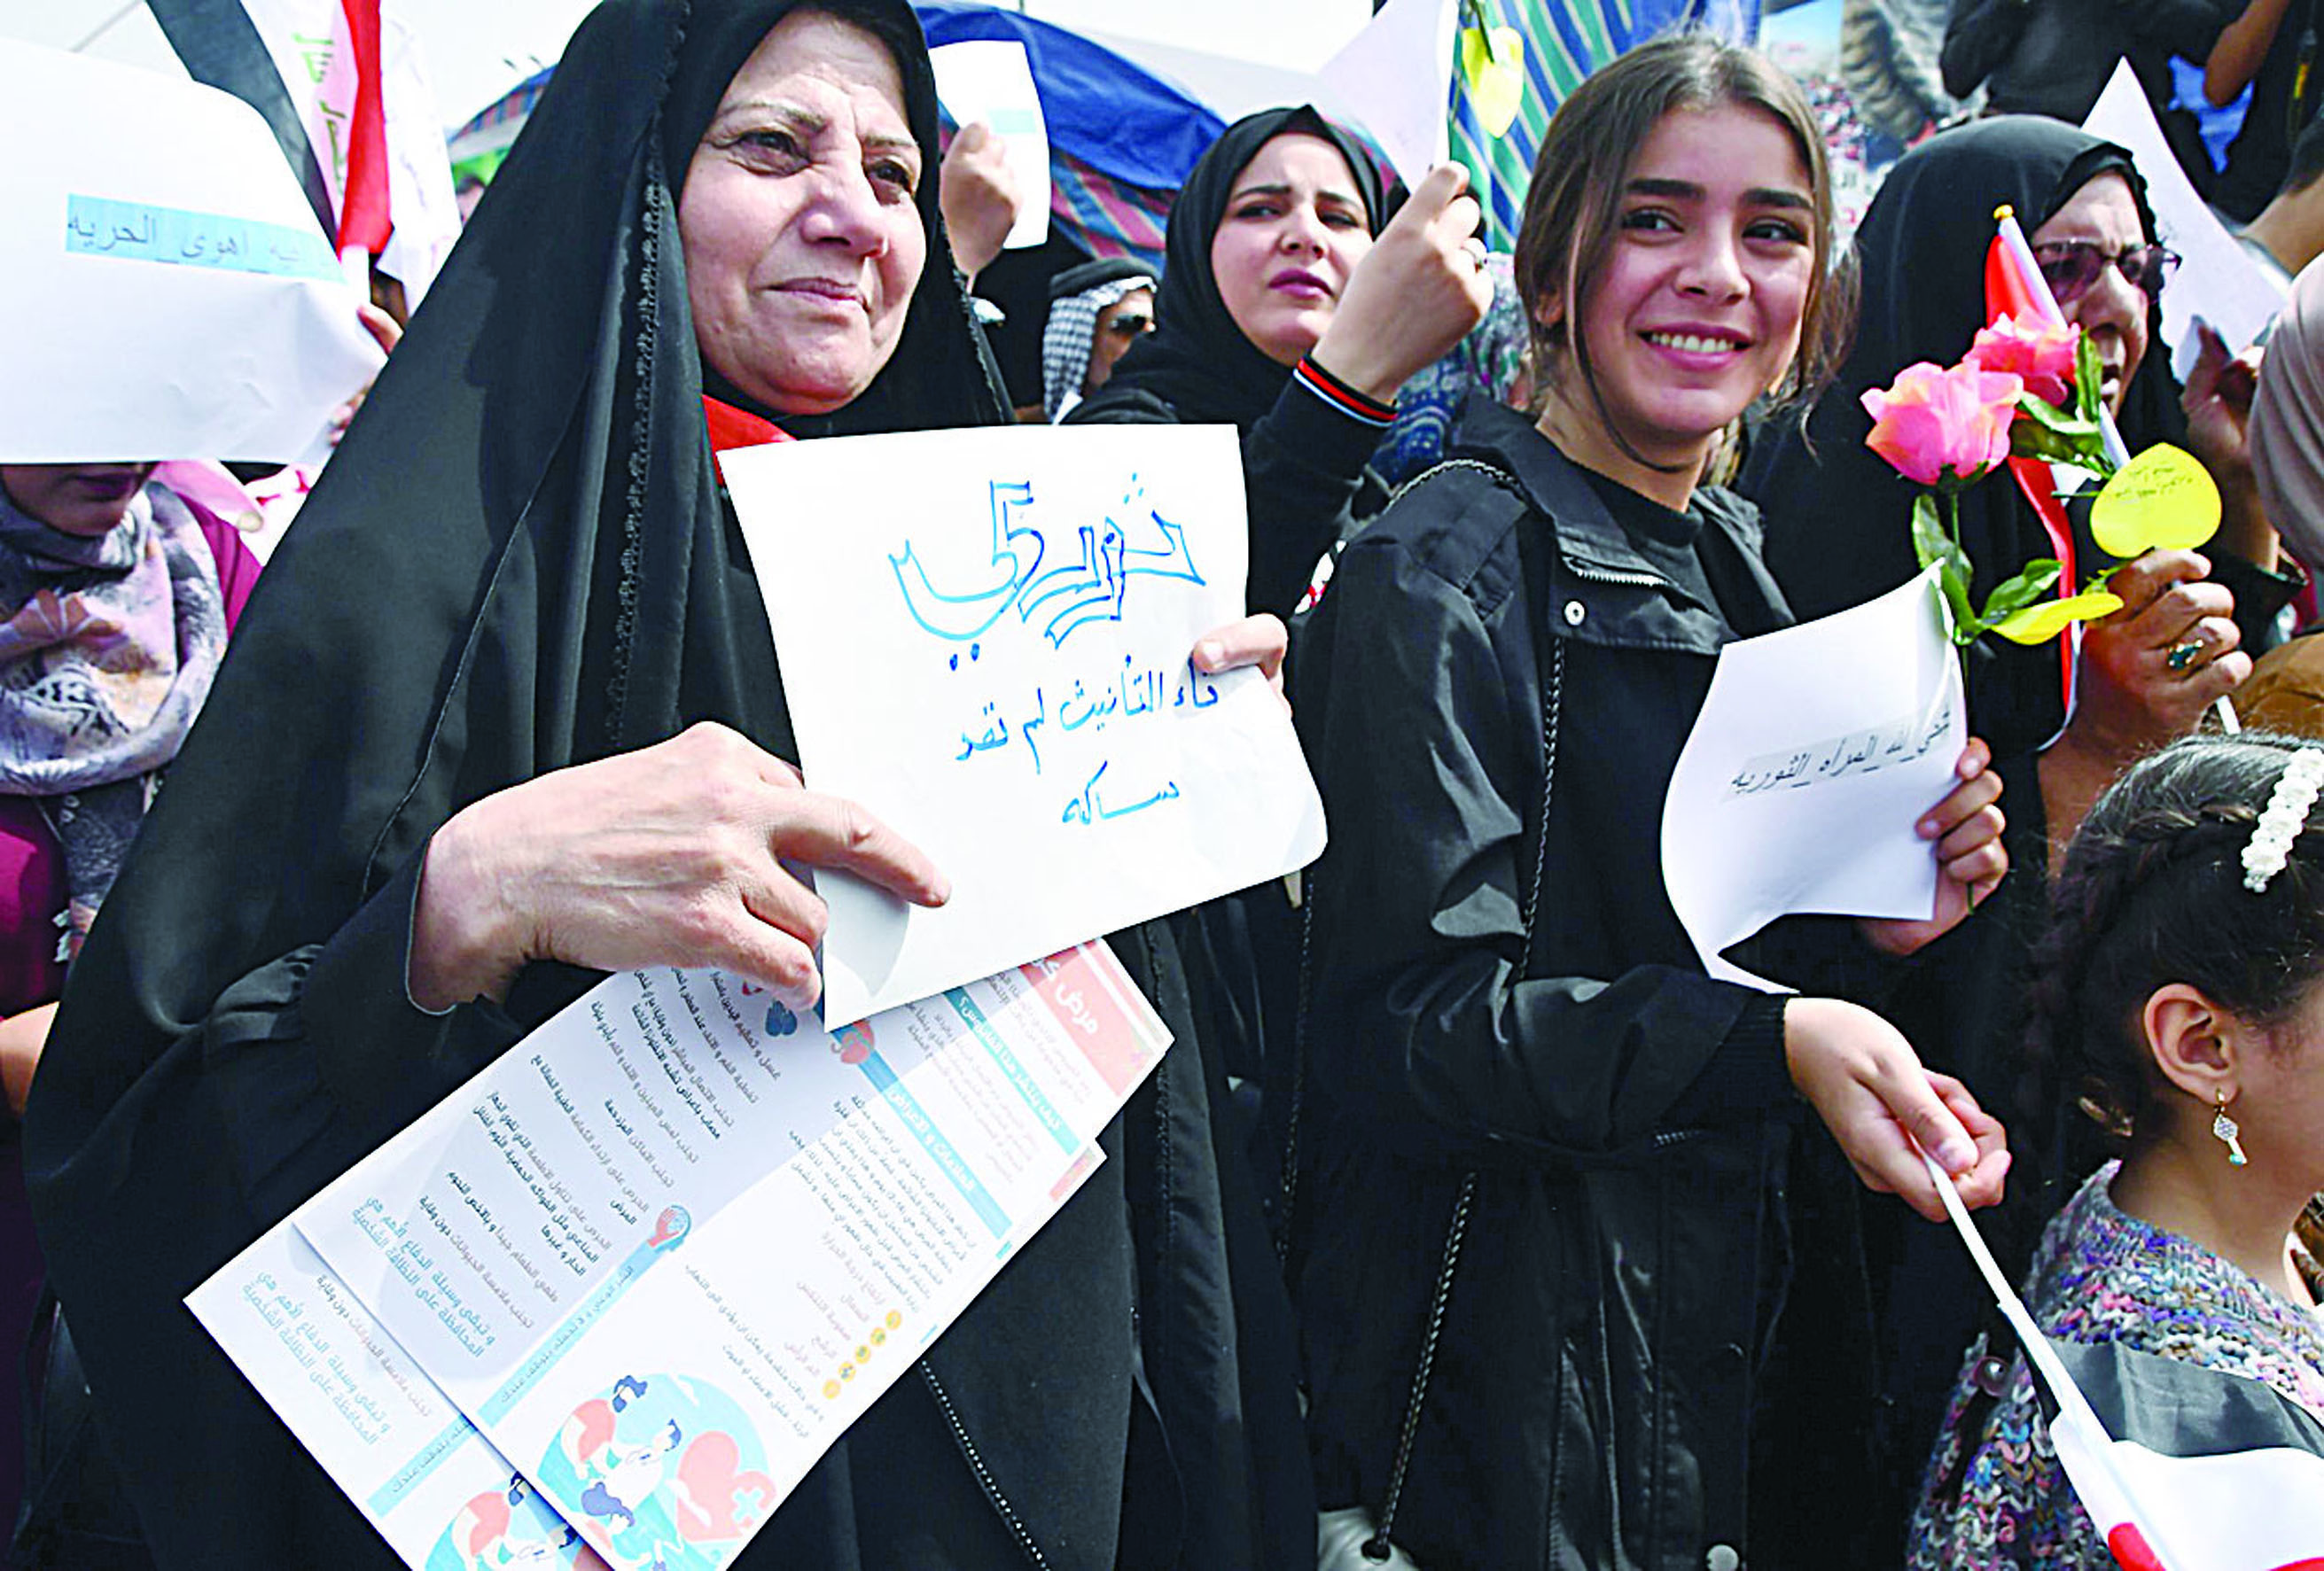 Iraqi women holding a placarda and roses take part in an anti-government demonstration in Iraq's southern city of Nasiriyah in Dhi Qar province, during the international Women's Day on March 8, 2020. (Photo by Asaad NIAZI / AFP)